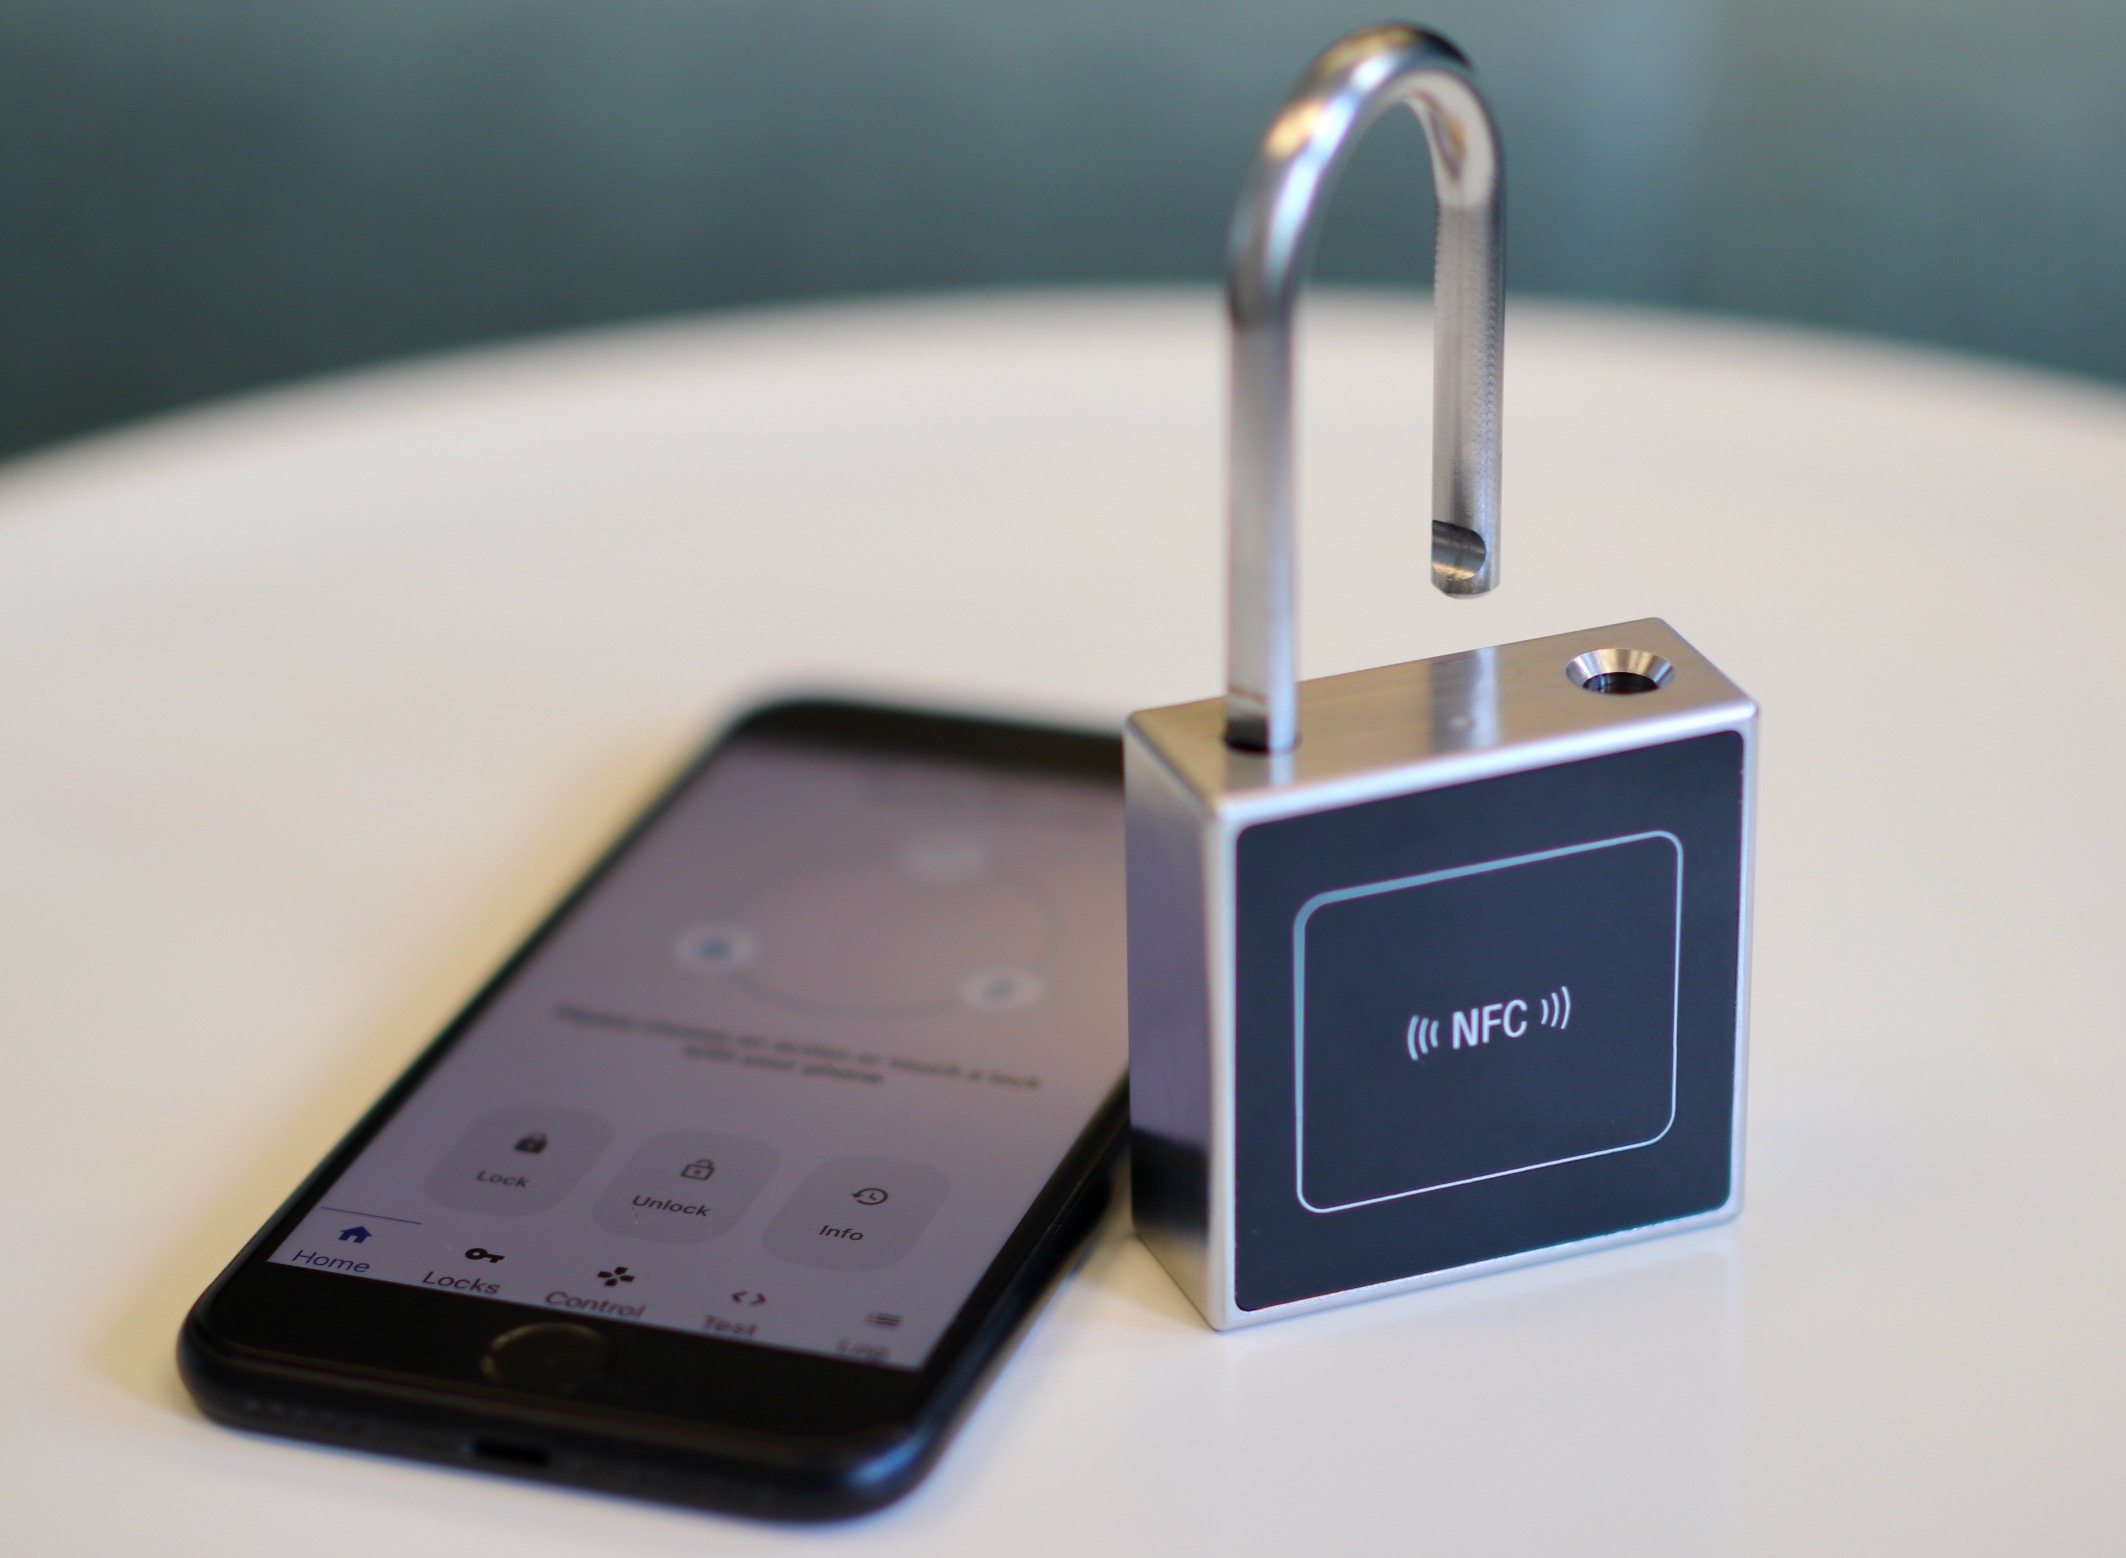 NuCurrent and Infineon Partner for Deploying Smart Lock and Energy Harvesting Technology